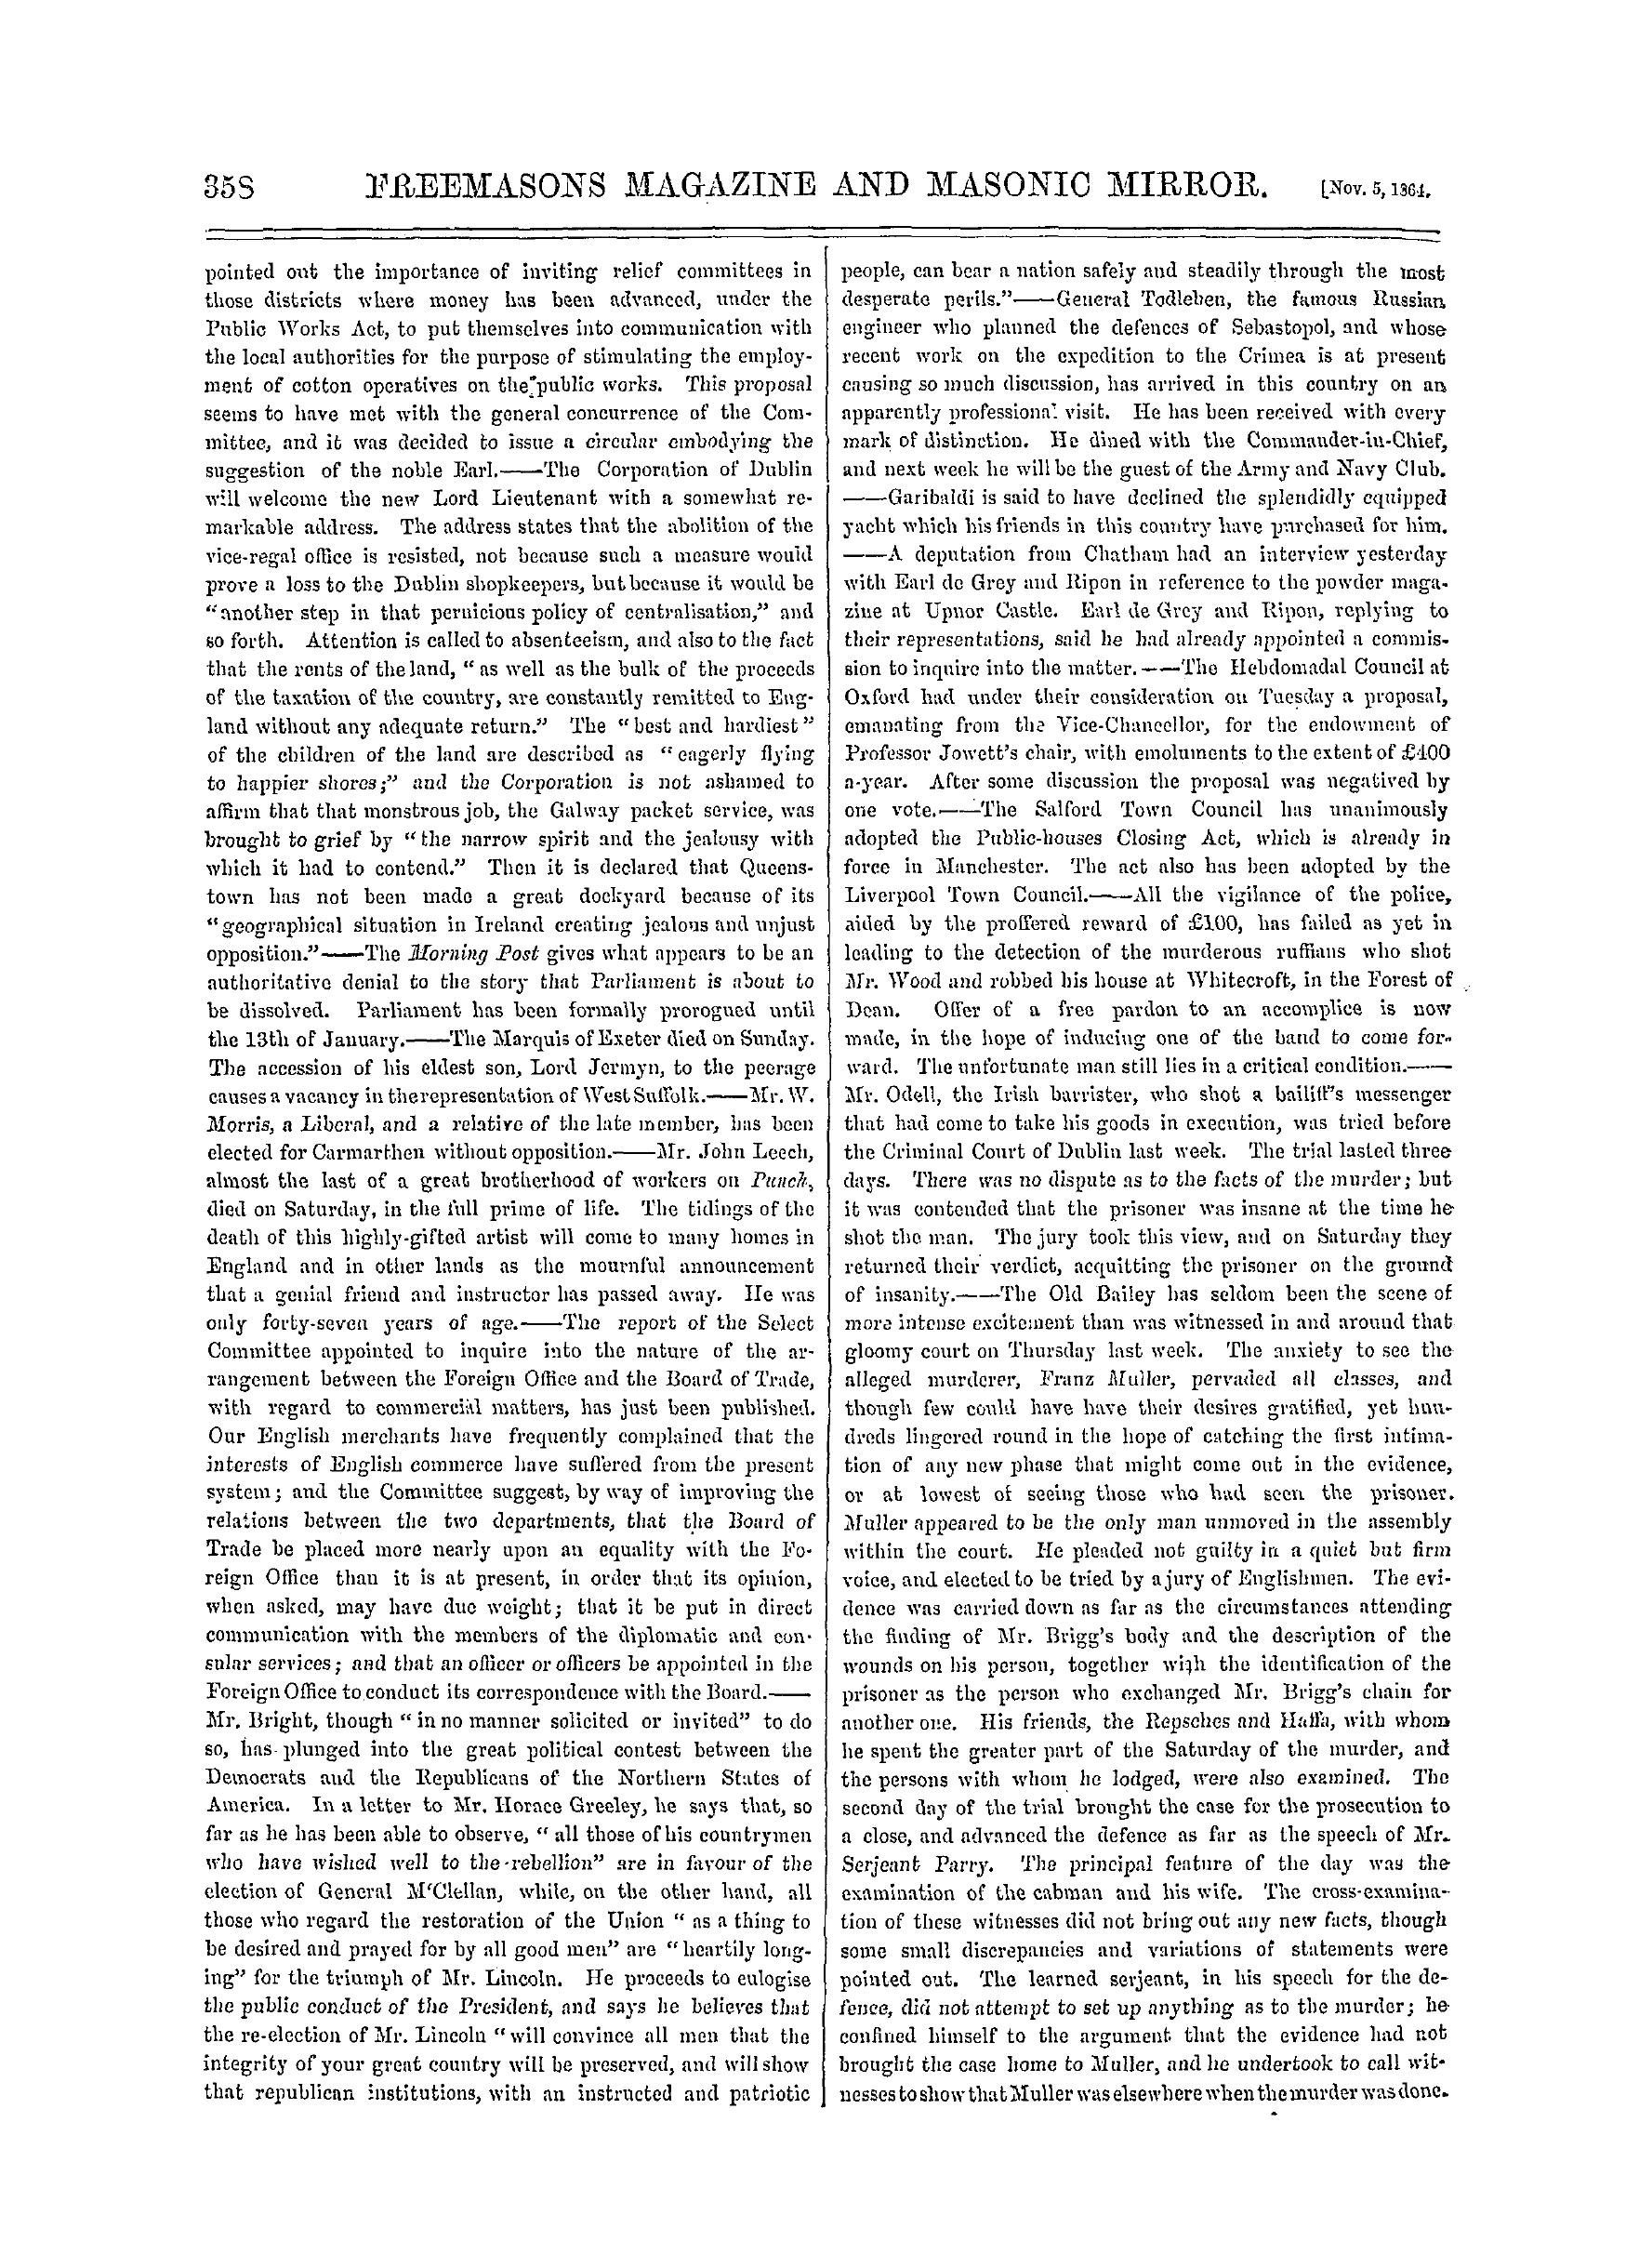 Page 18